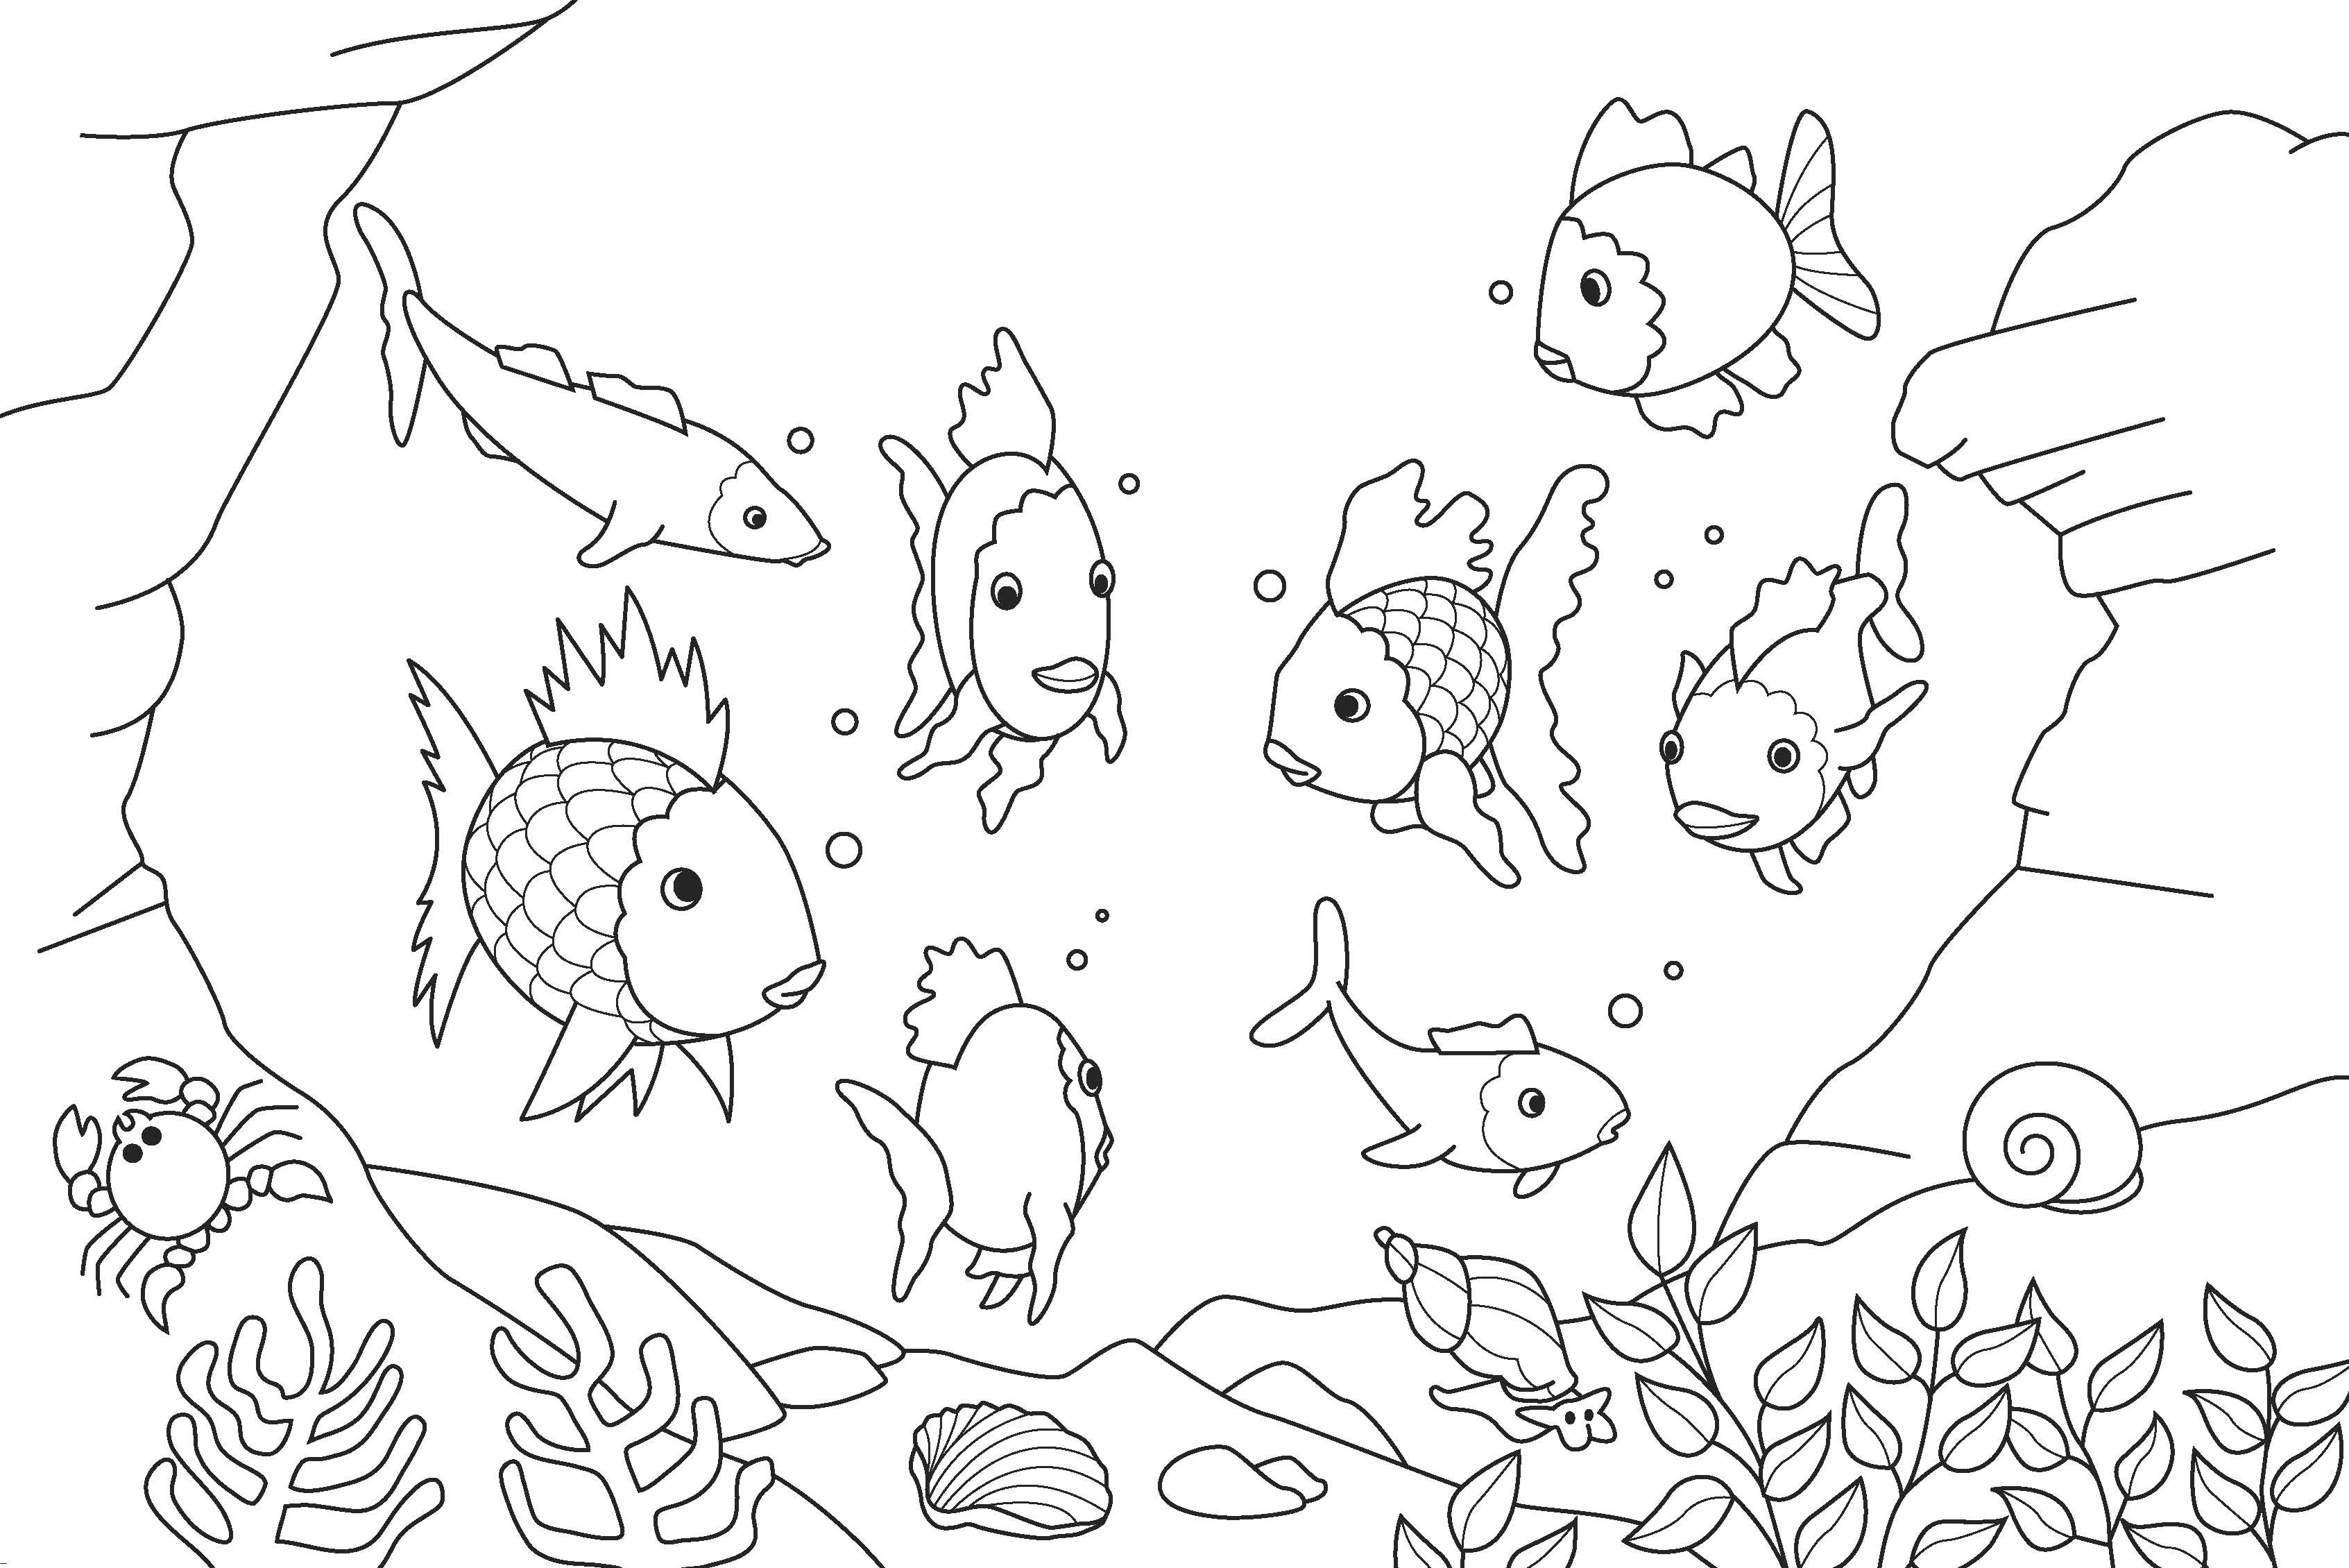 Coloring The fish in the water. Category fish. Tags:  fish, water, crab, algae.